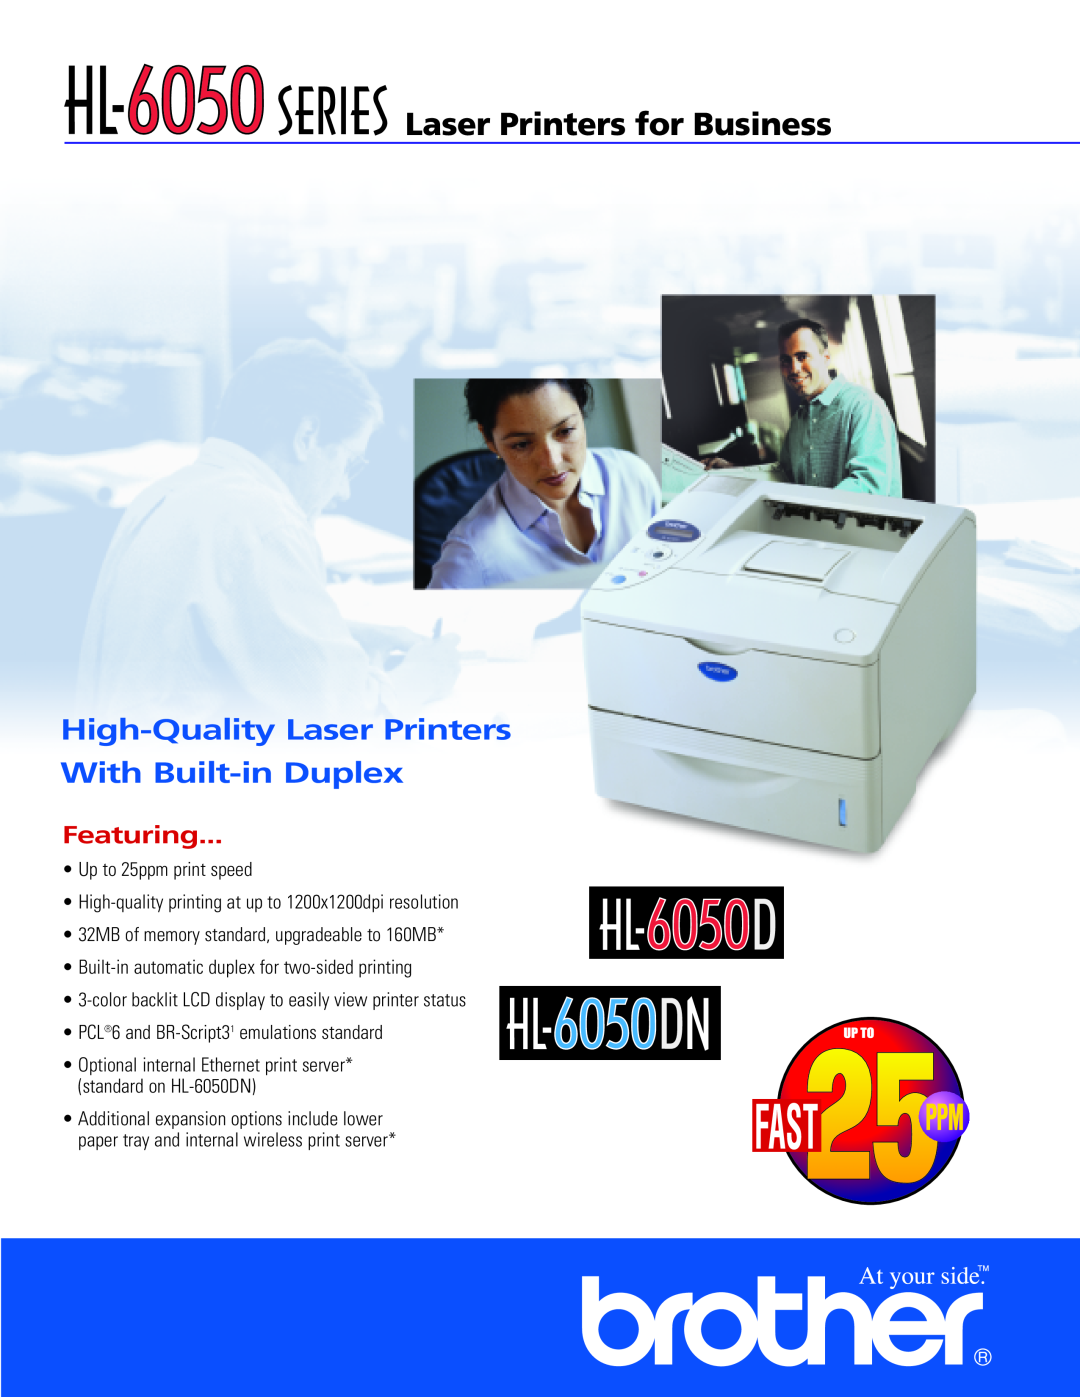 Brother HL-6050 Series manual High-Quality Laser Printers With Built-in Duplex, Featuring 